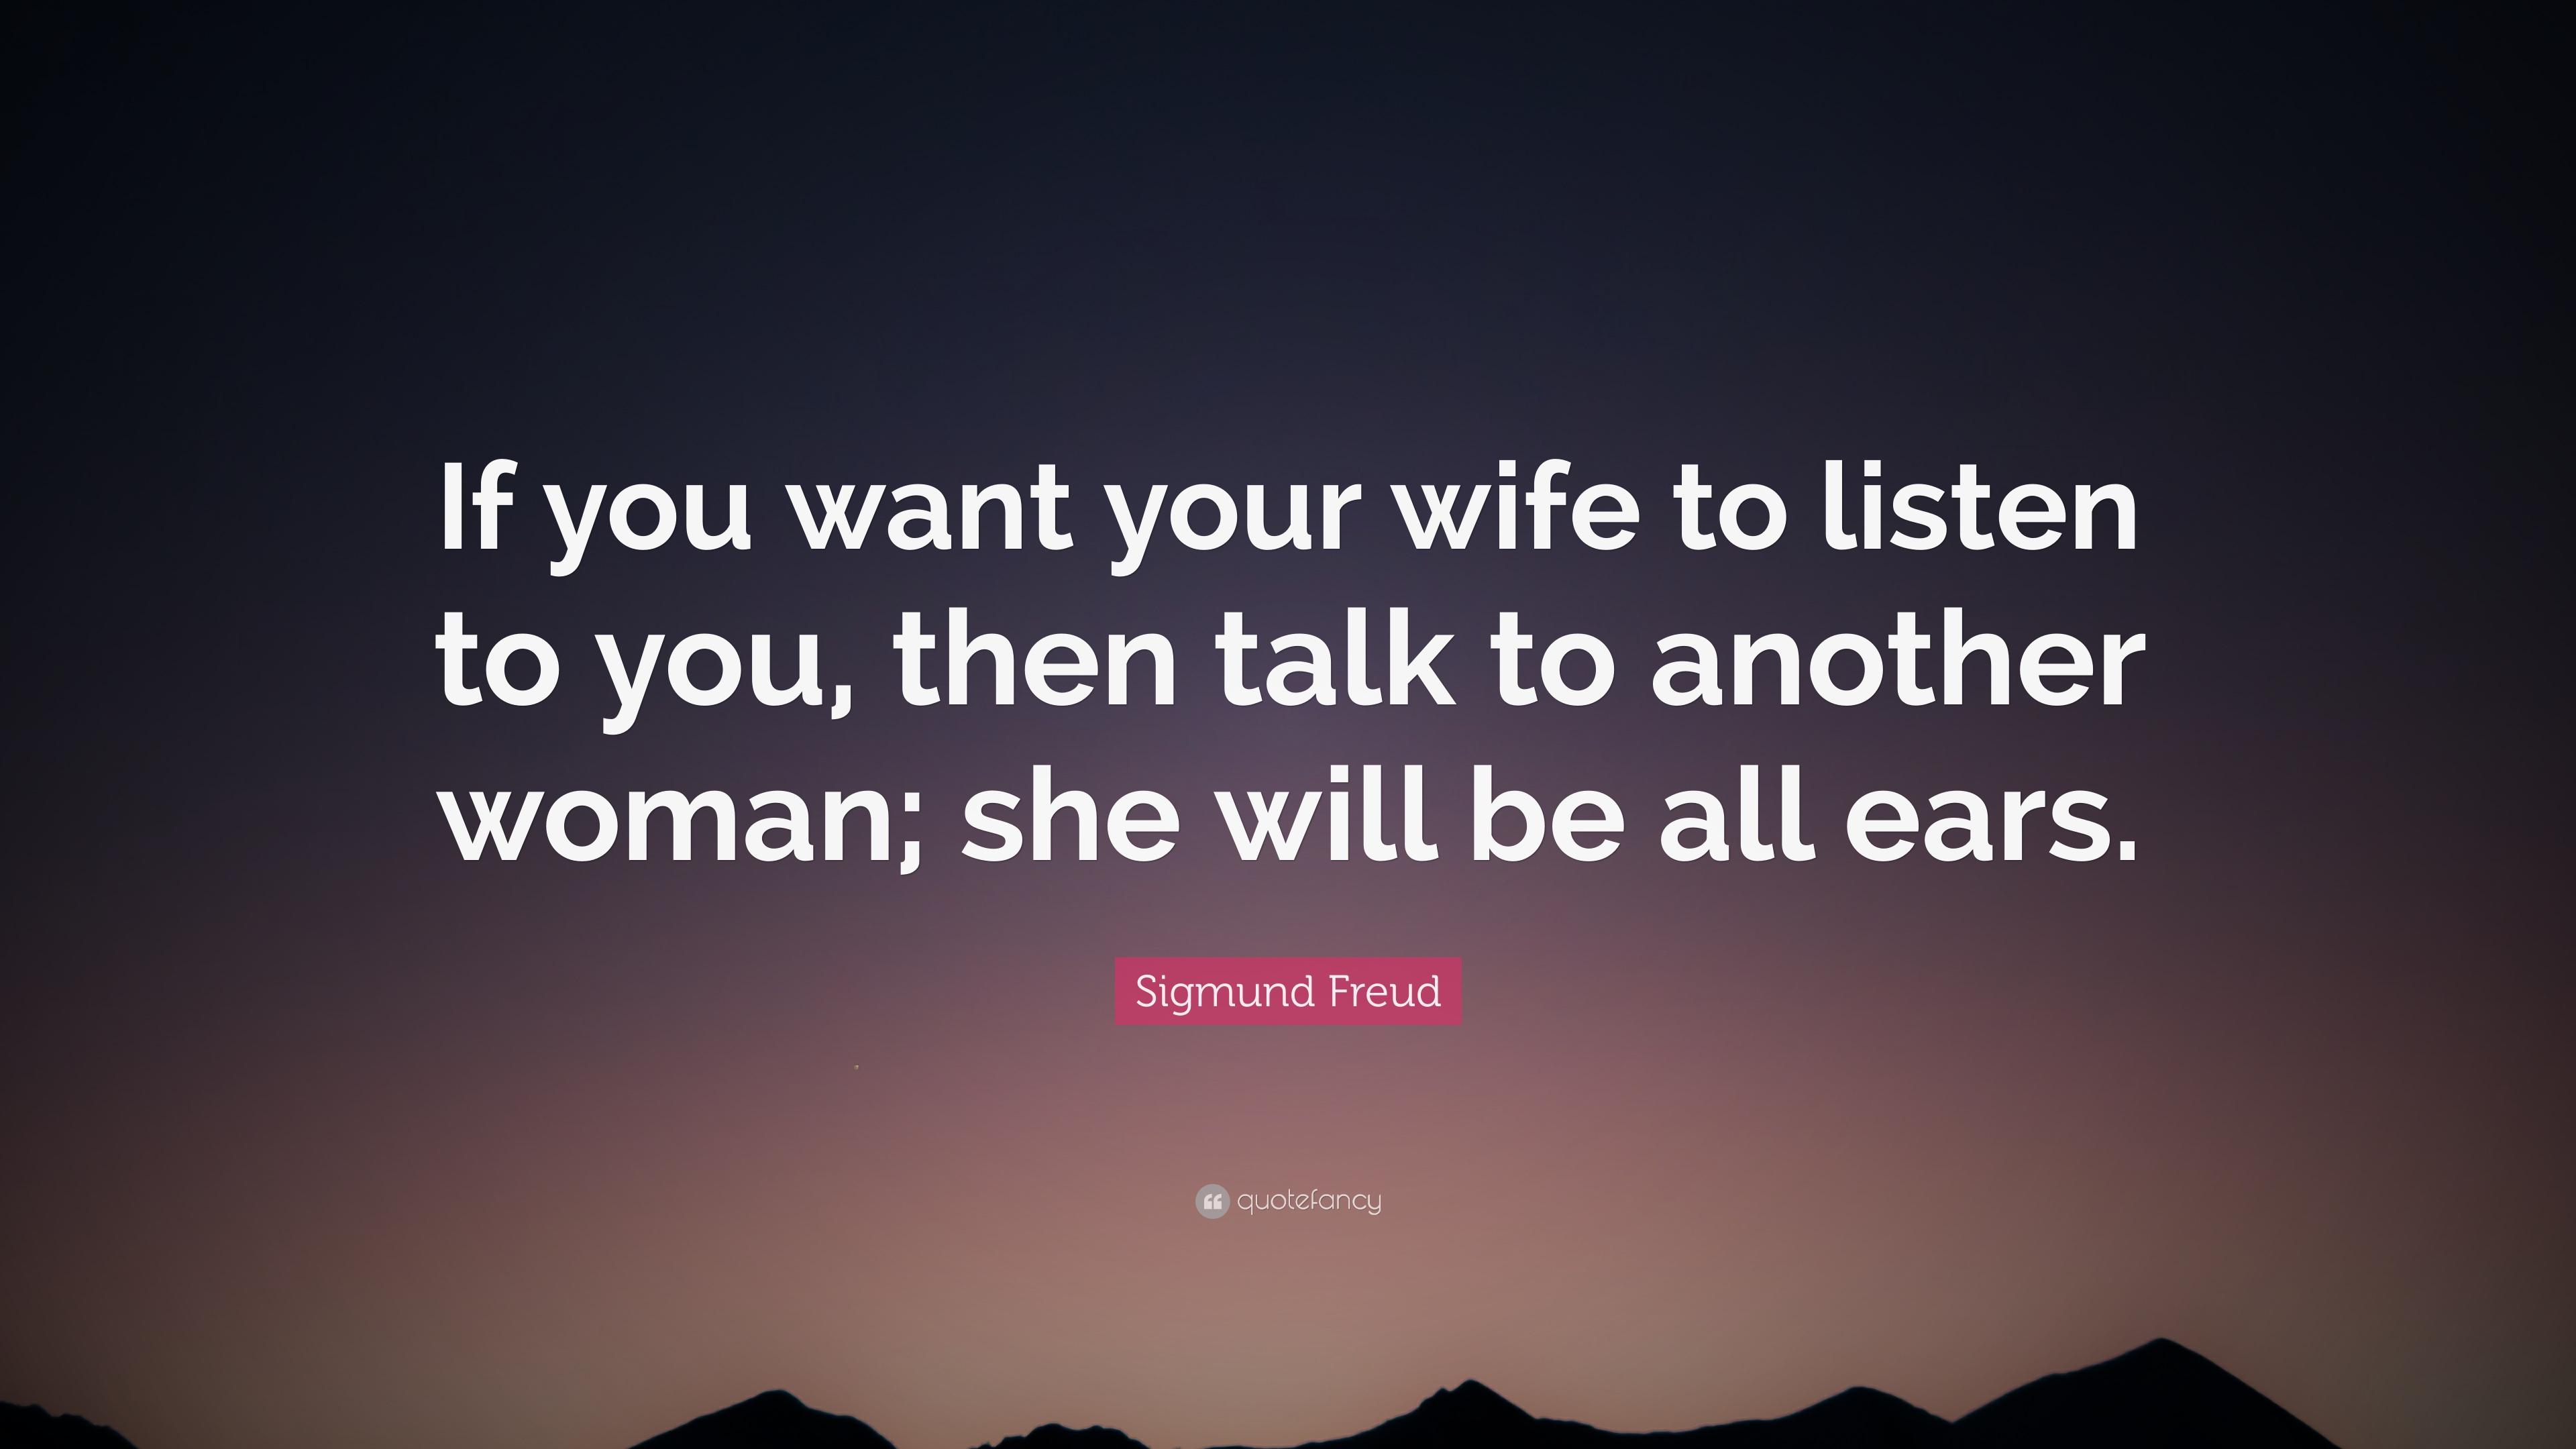 Sigmund Freud Quote: “If you want your wife to listen to you, then